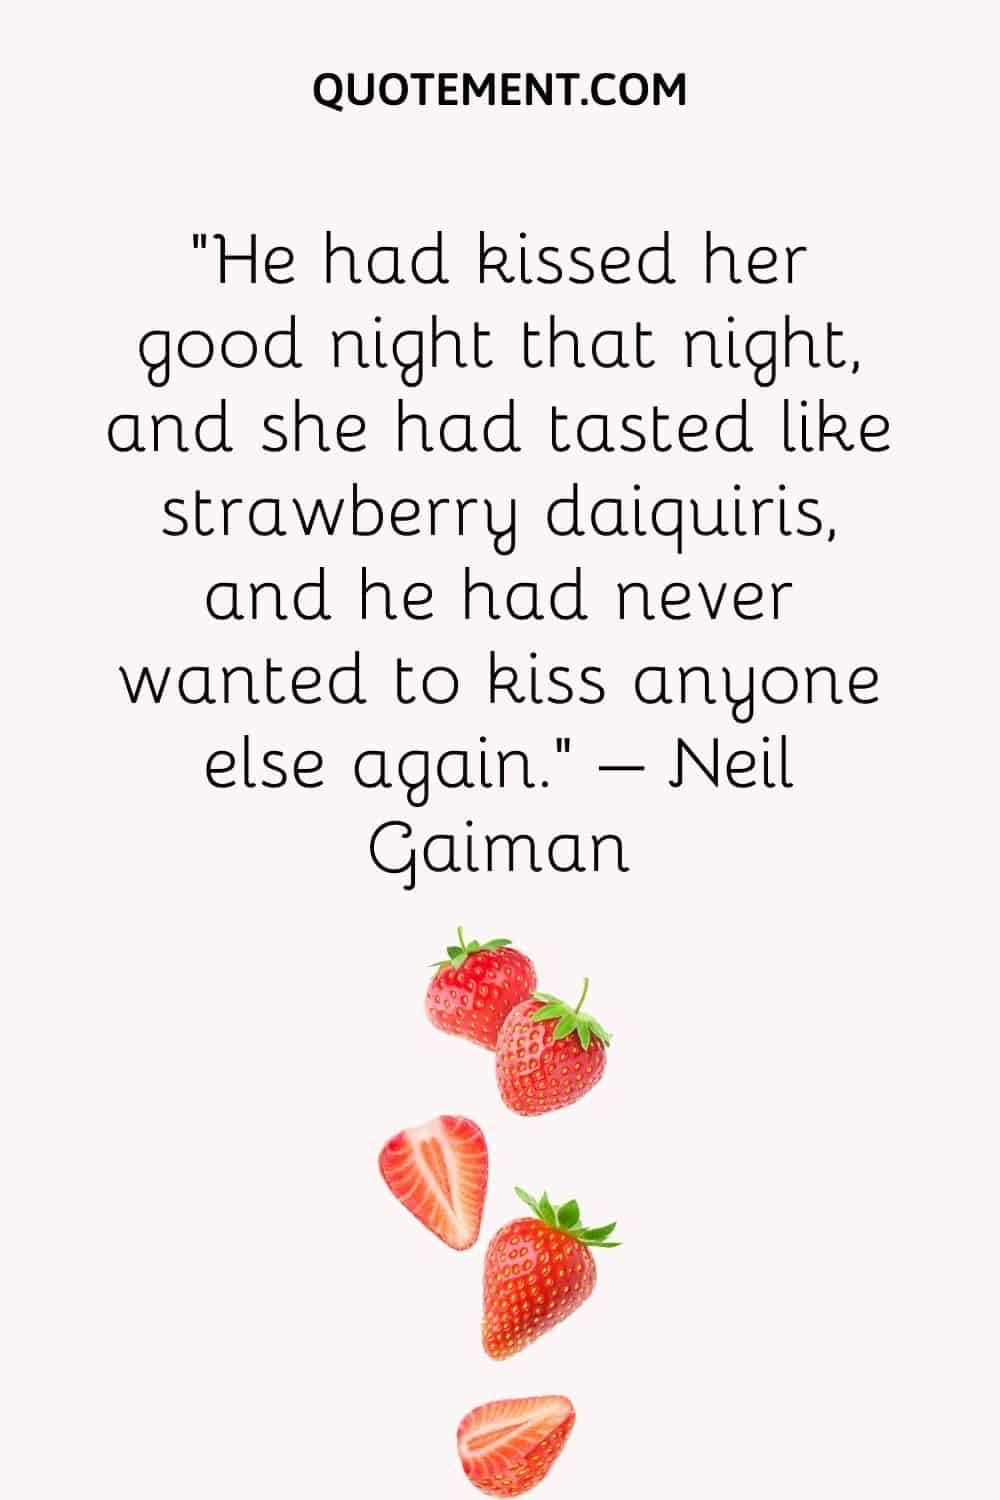 He had kissed her good night that night, and she had tasted like strawberry daiquiris, and he had never wanted to kiss anyone else again.